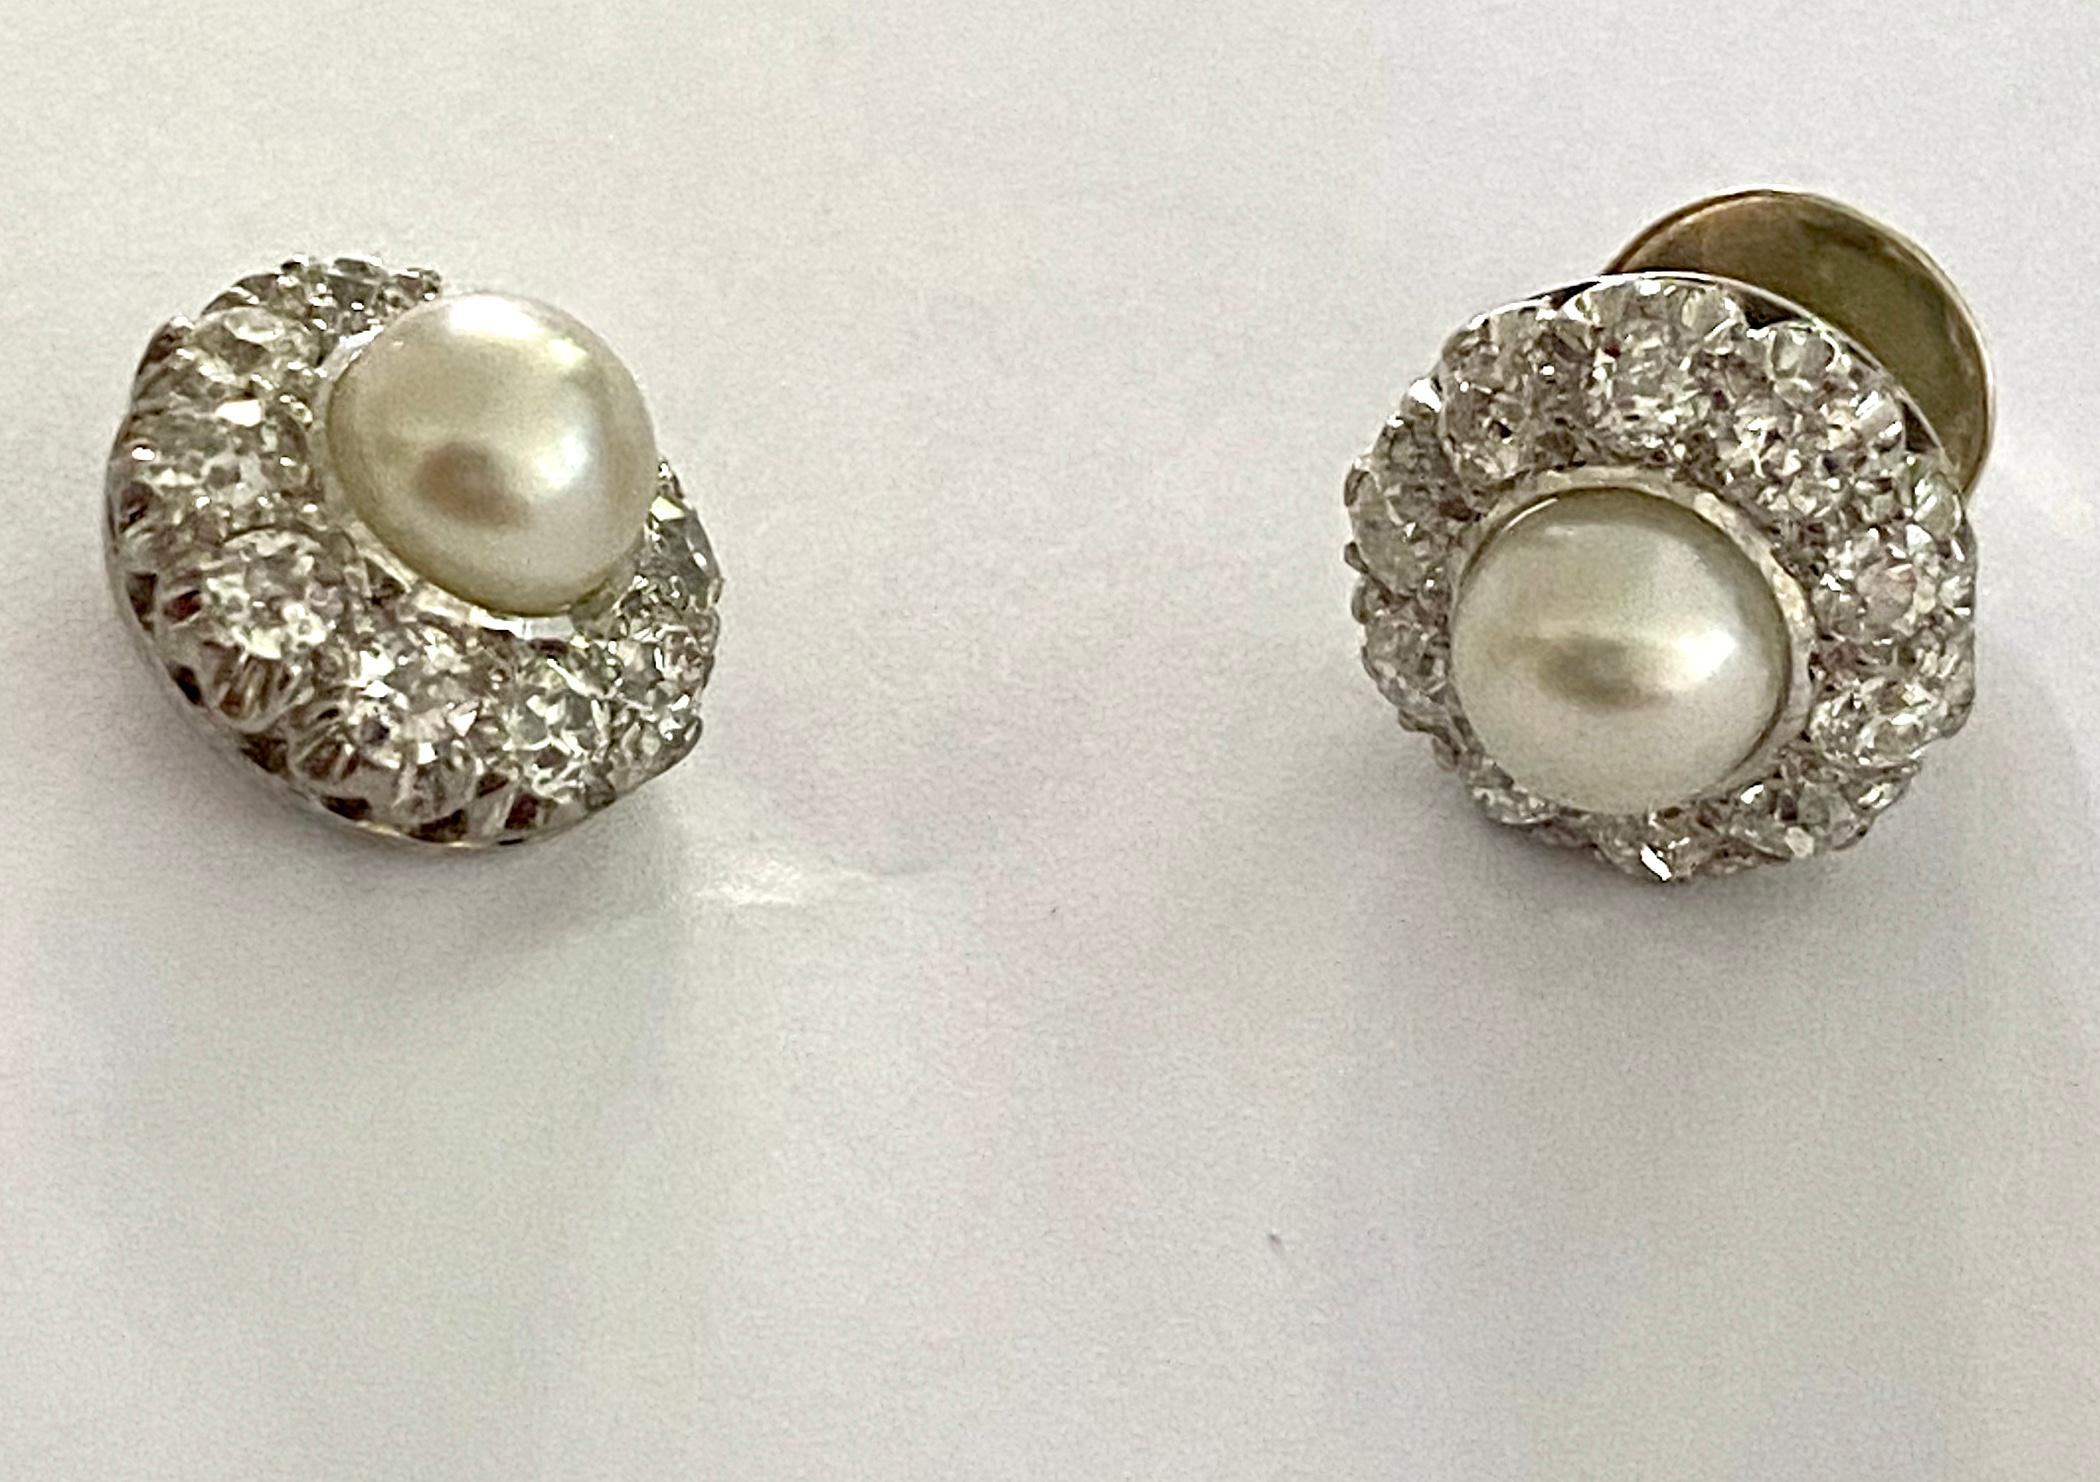 One (1) 14K. White Gold earrings 585/- model: Entourage
set with 2 bear round Cultured Pearls (Akoya) and  20 Old European cut natural Diamonds
Total Pearl weight: 3.83 ct.
Total diamond weight: 1.80 ct  Si  /F
Made in Holland ca 1920  (Dutch stamps)